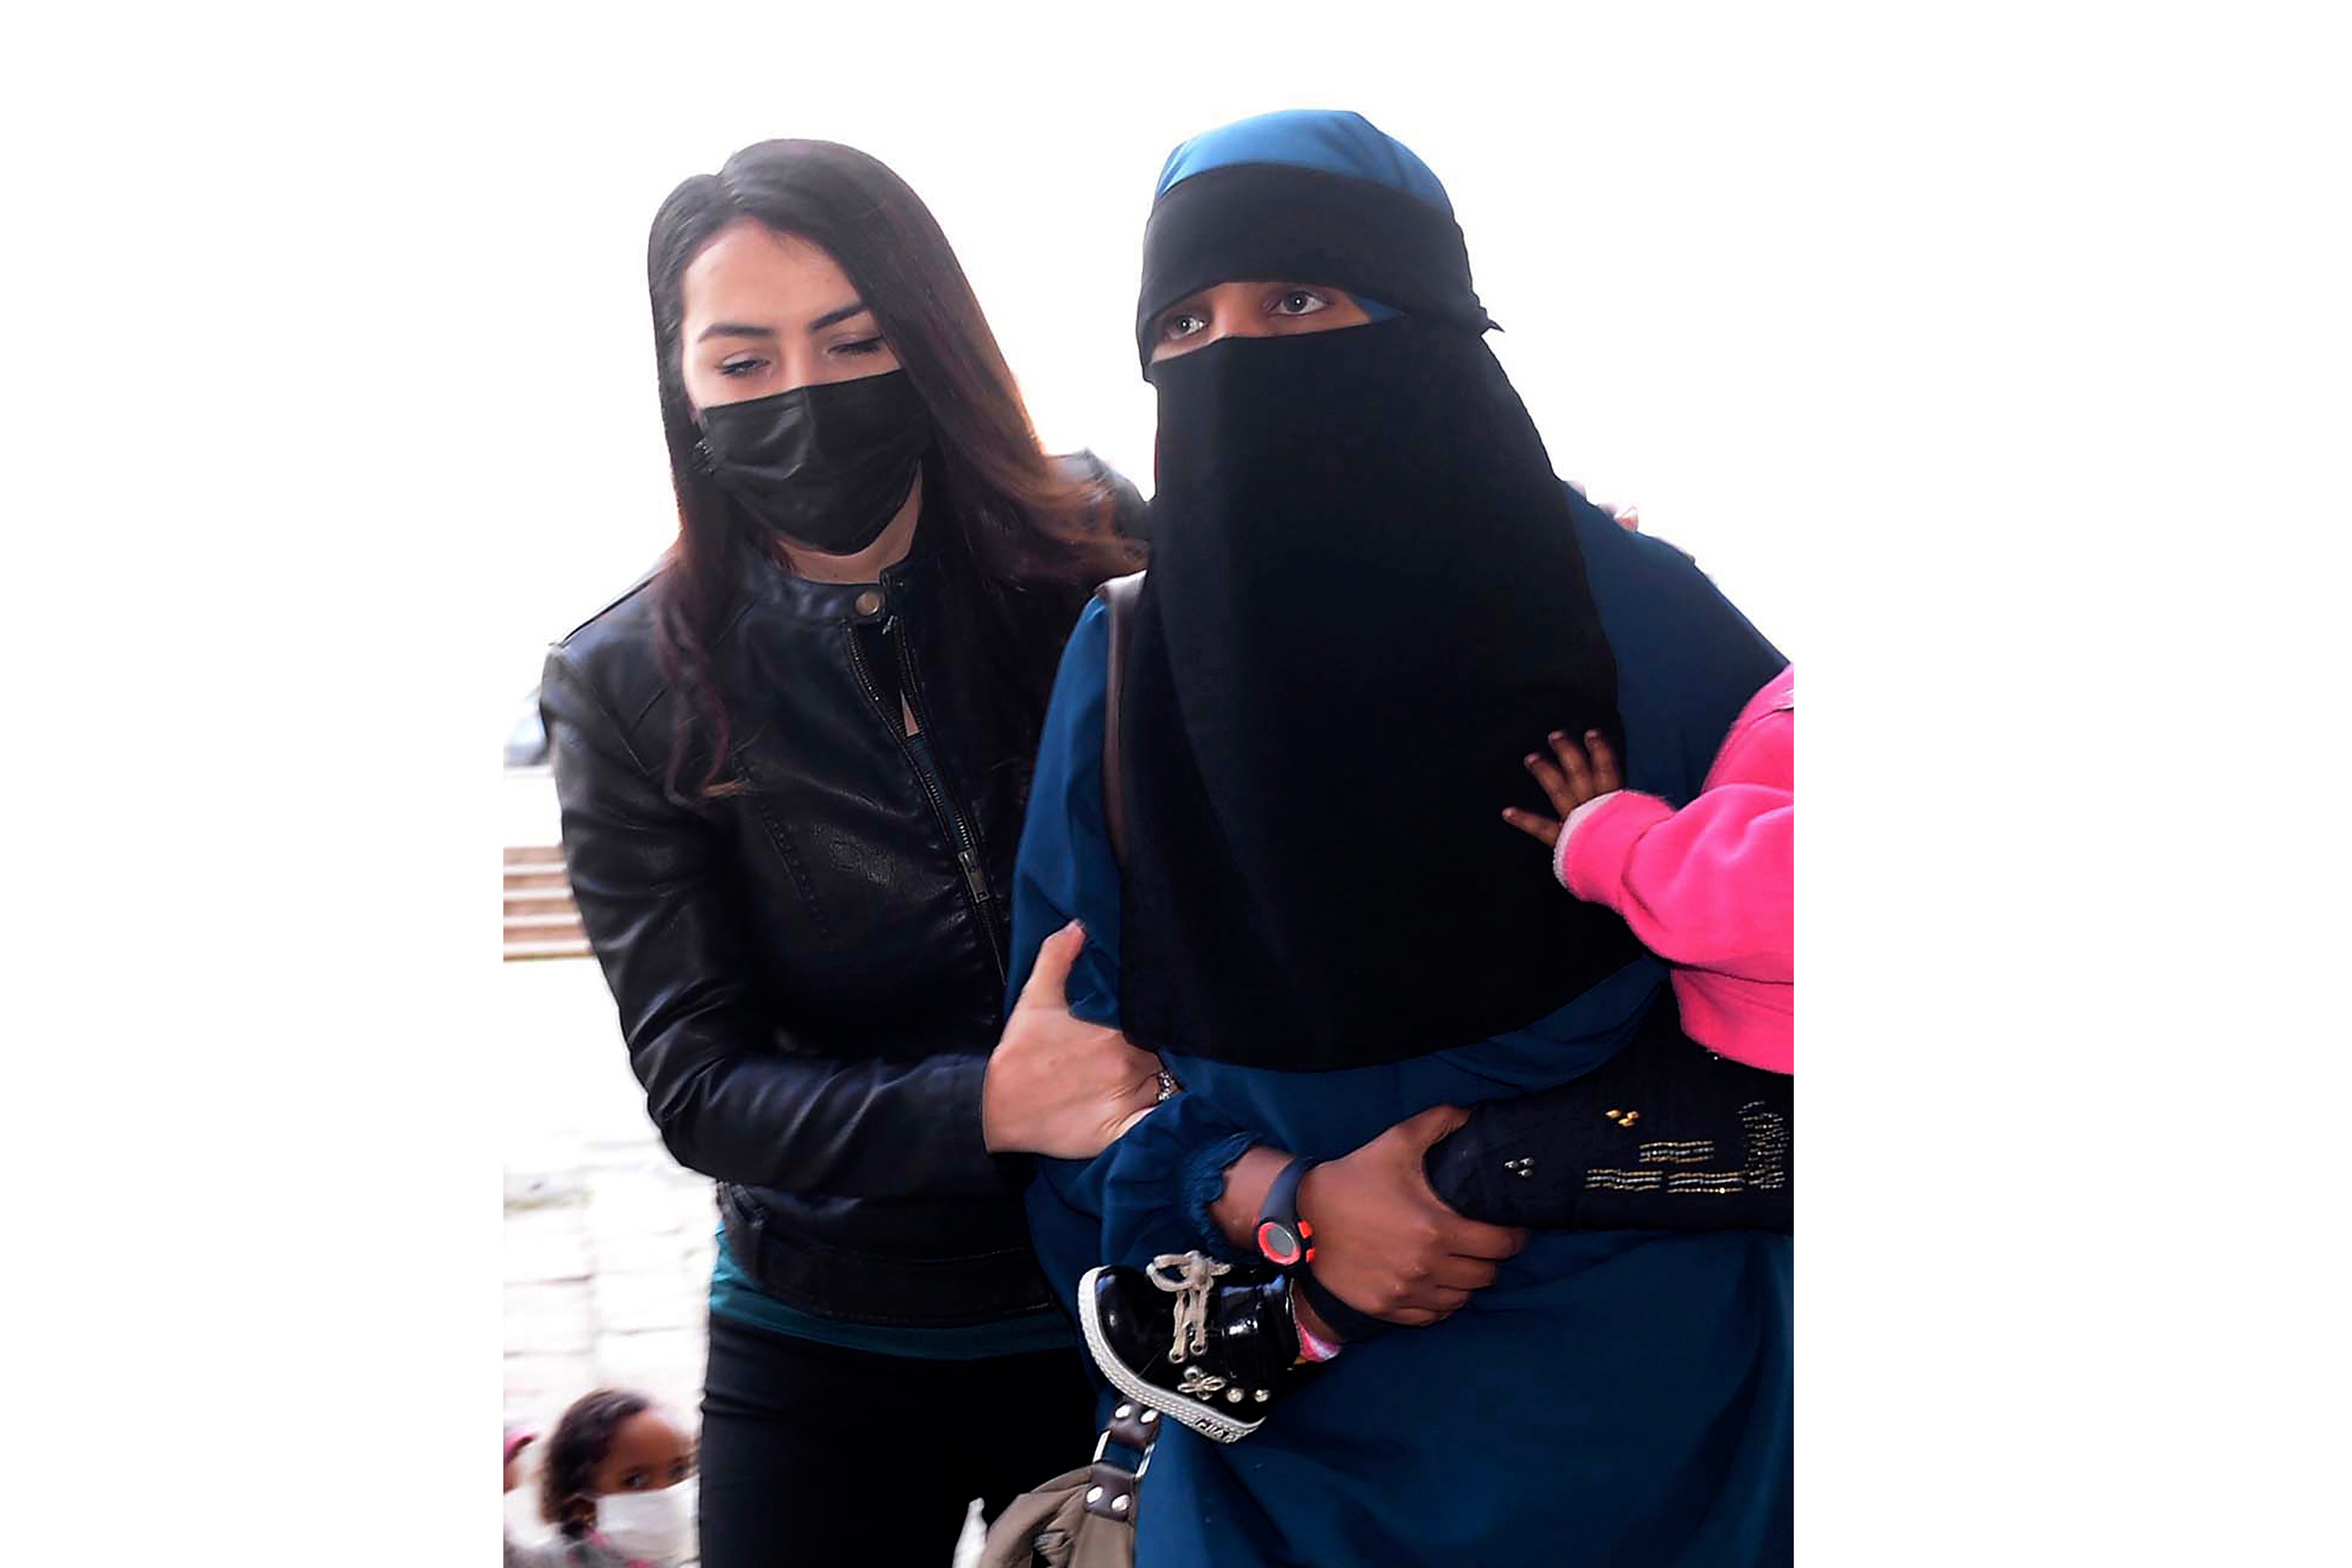 File: The woman, suspected to be linked to Isis, being escorted by Turkish police in February